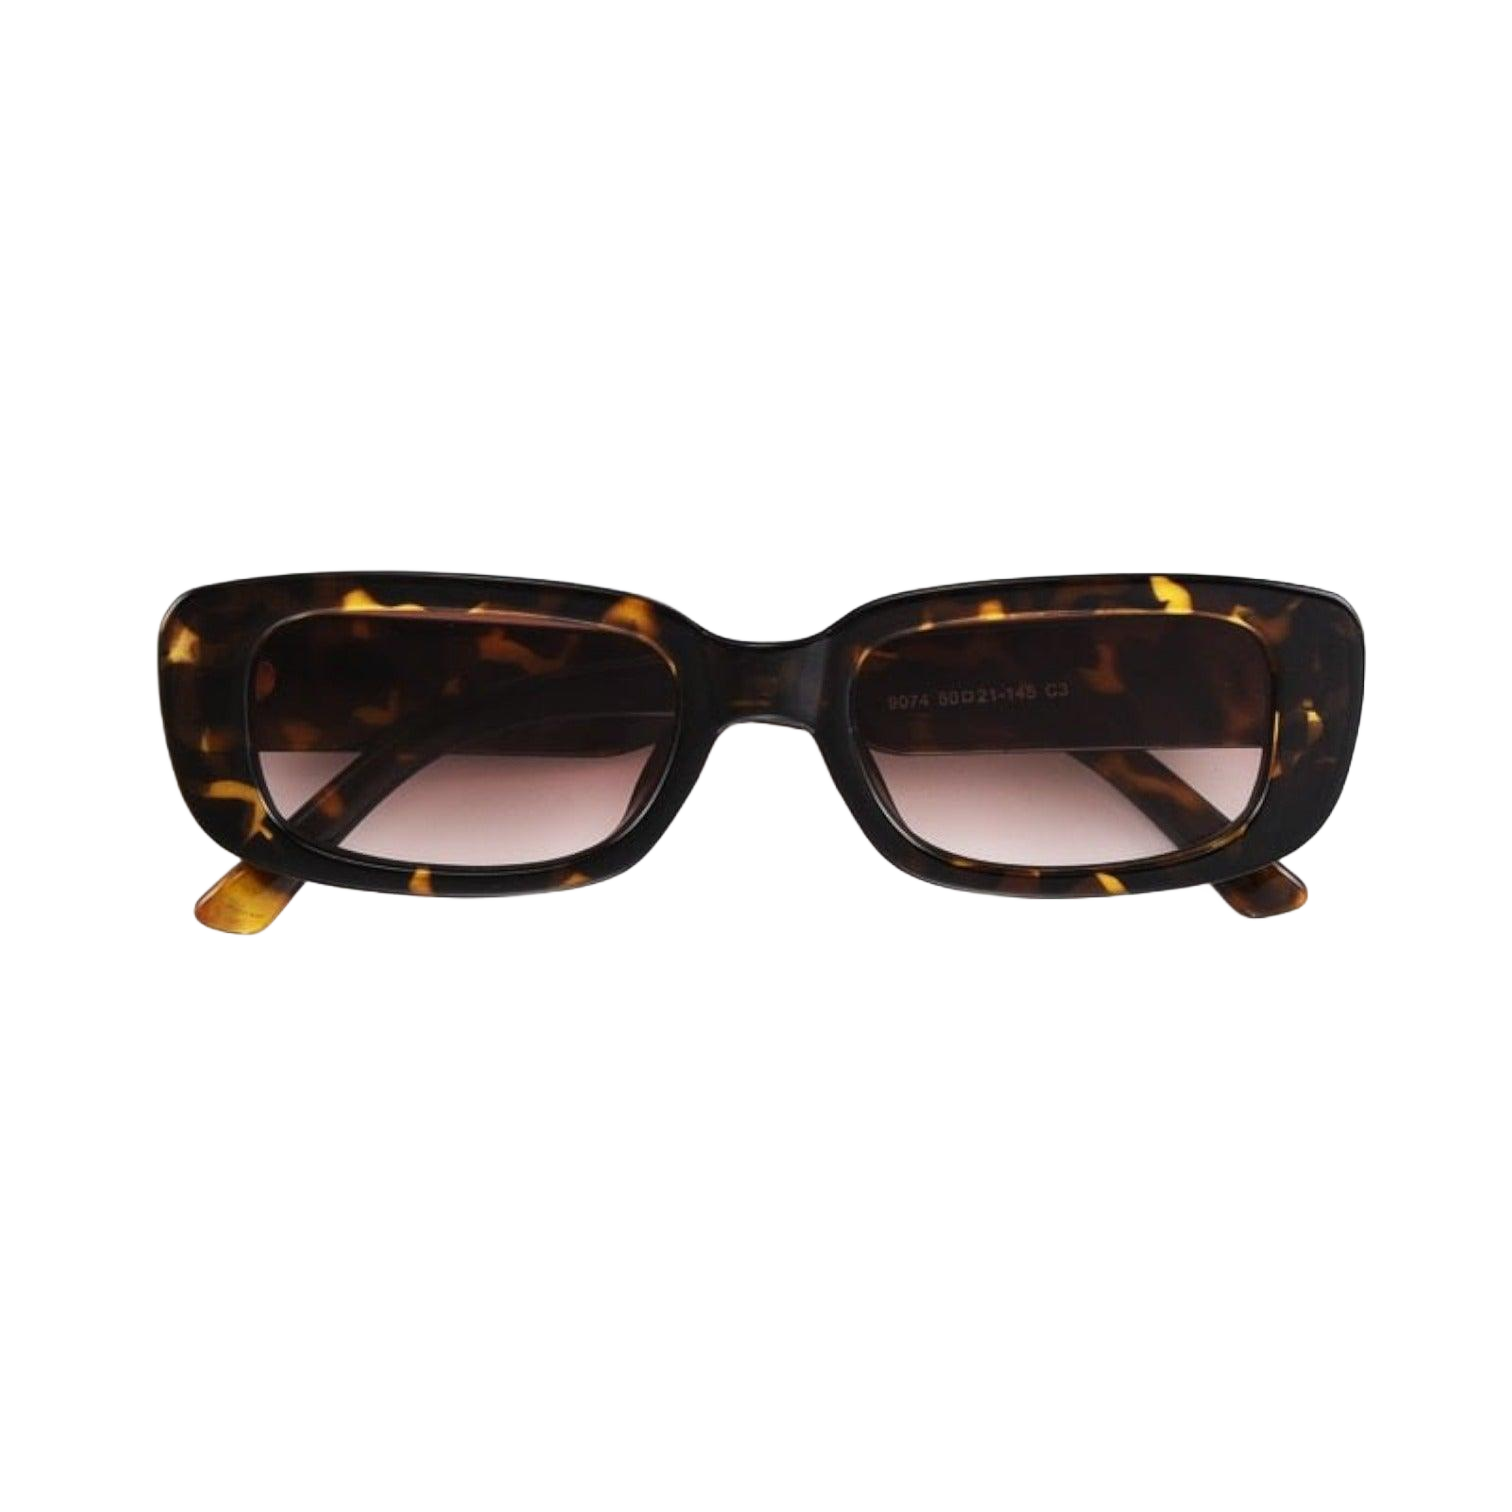 Sunglasses Eyewear Black MILANO Festival Fashion Concert Rave Outfit Party